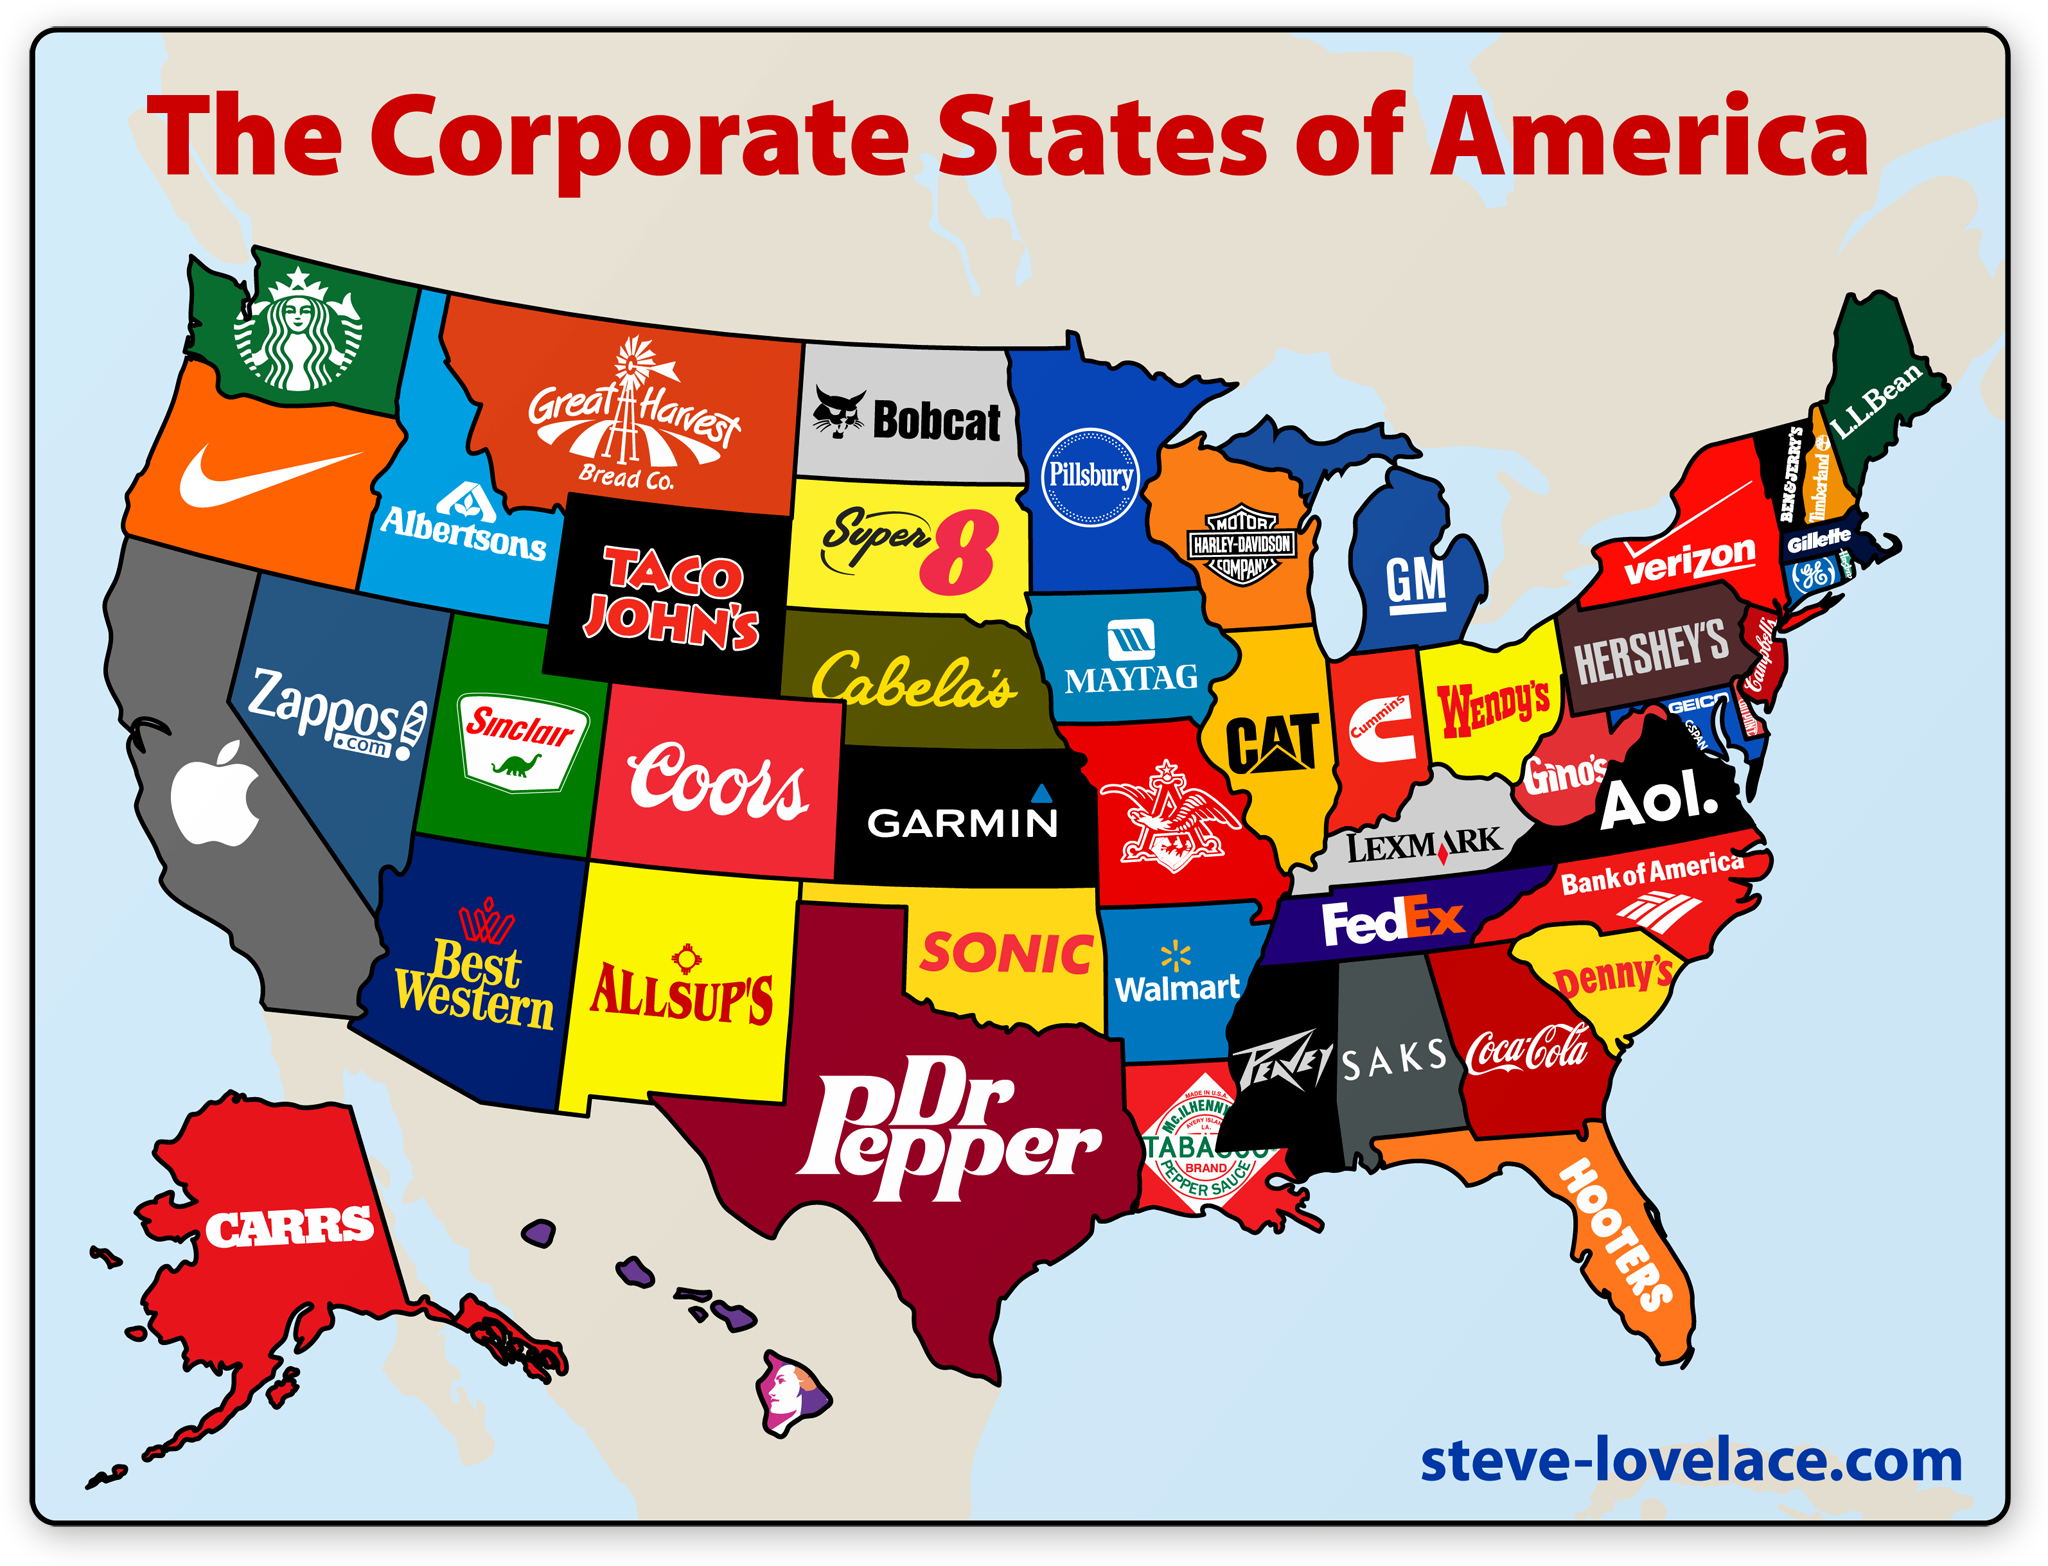 Brand New: The Corporate States of America